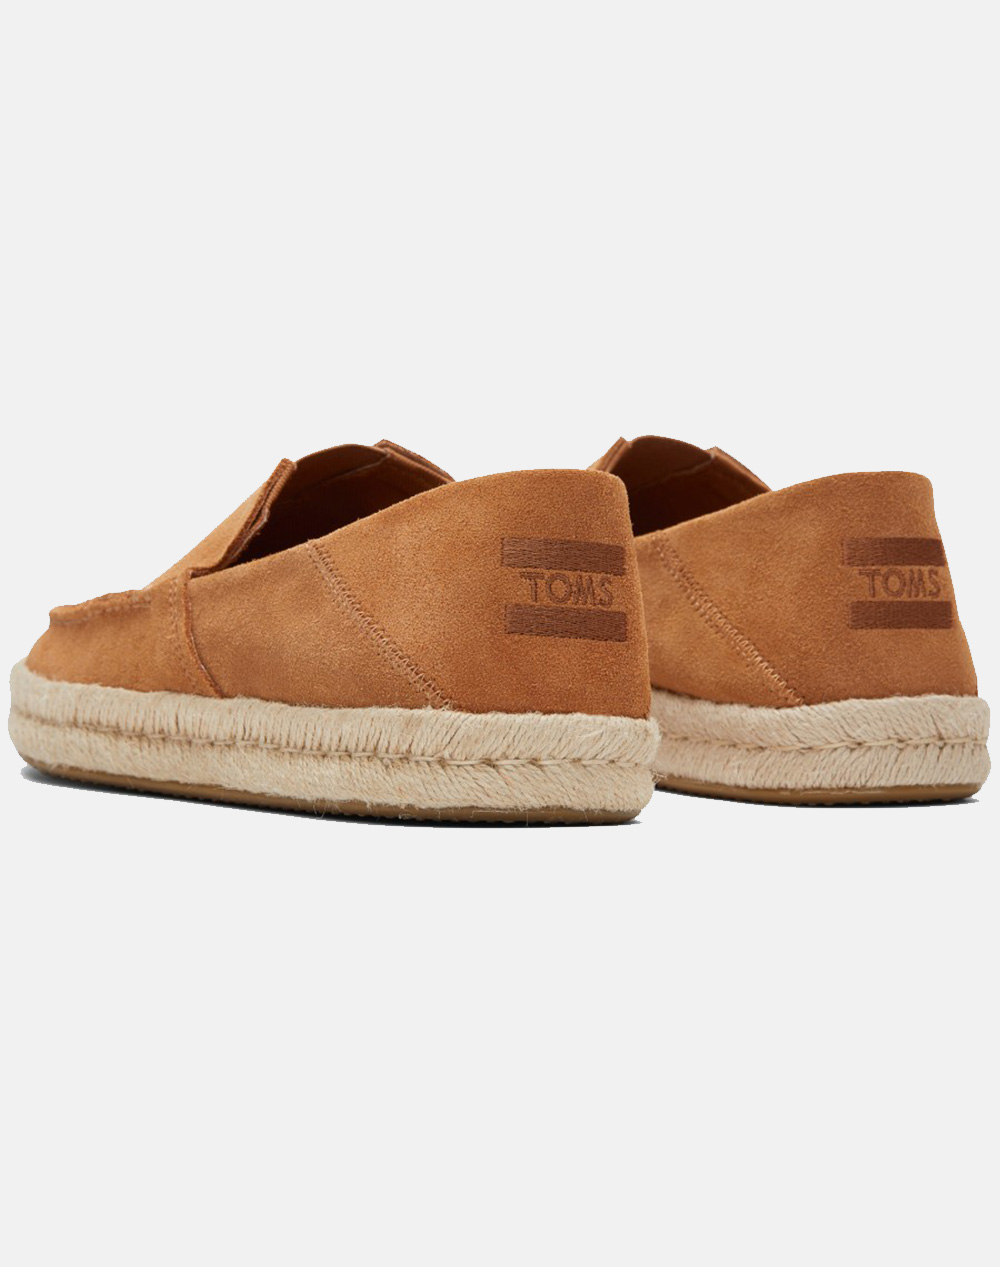 TOMS TAN SUEDE MN ALONSO ESP